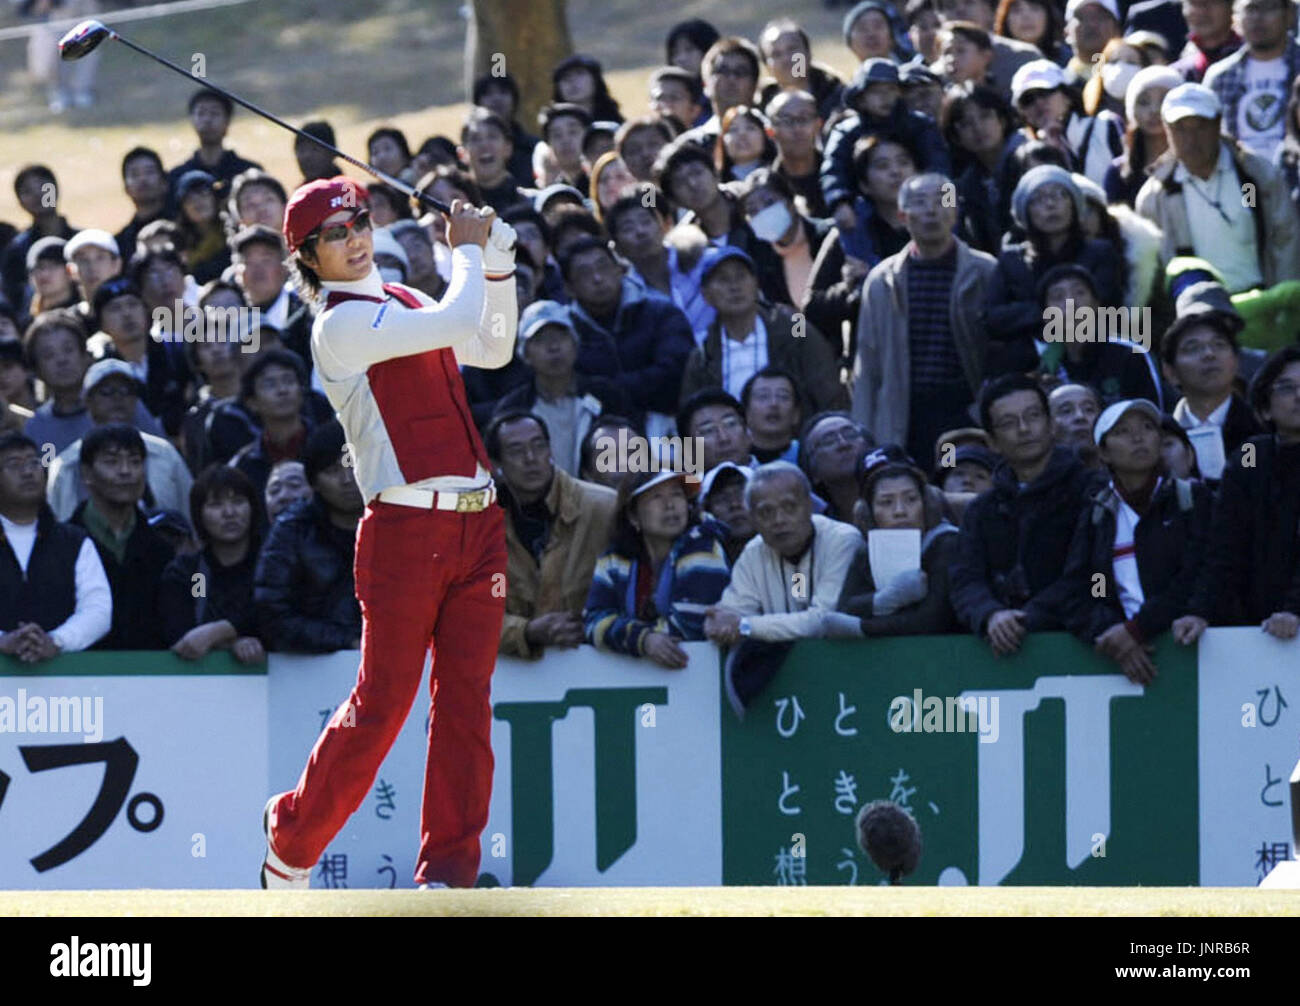 TOKYO, Japan - Ryo Ishikawa hits a tee shot on the 16th hole in the Nippon Series JT Cup at Tokyo Yomiuri Country Club on Dec. 6, 2009. The 18-year-old came 19th in the season's final tournament but became the youngest money champion in Japanese golf history. (Kyodo) Stock Photo